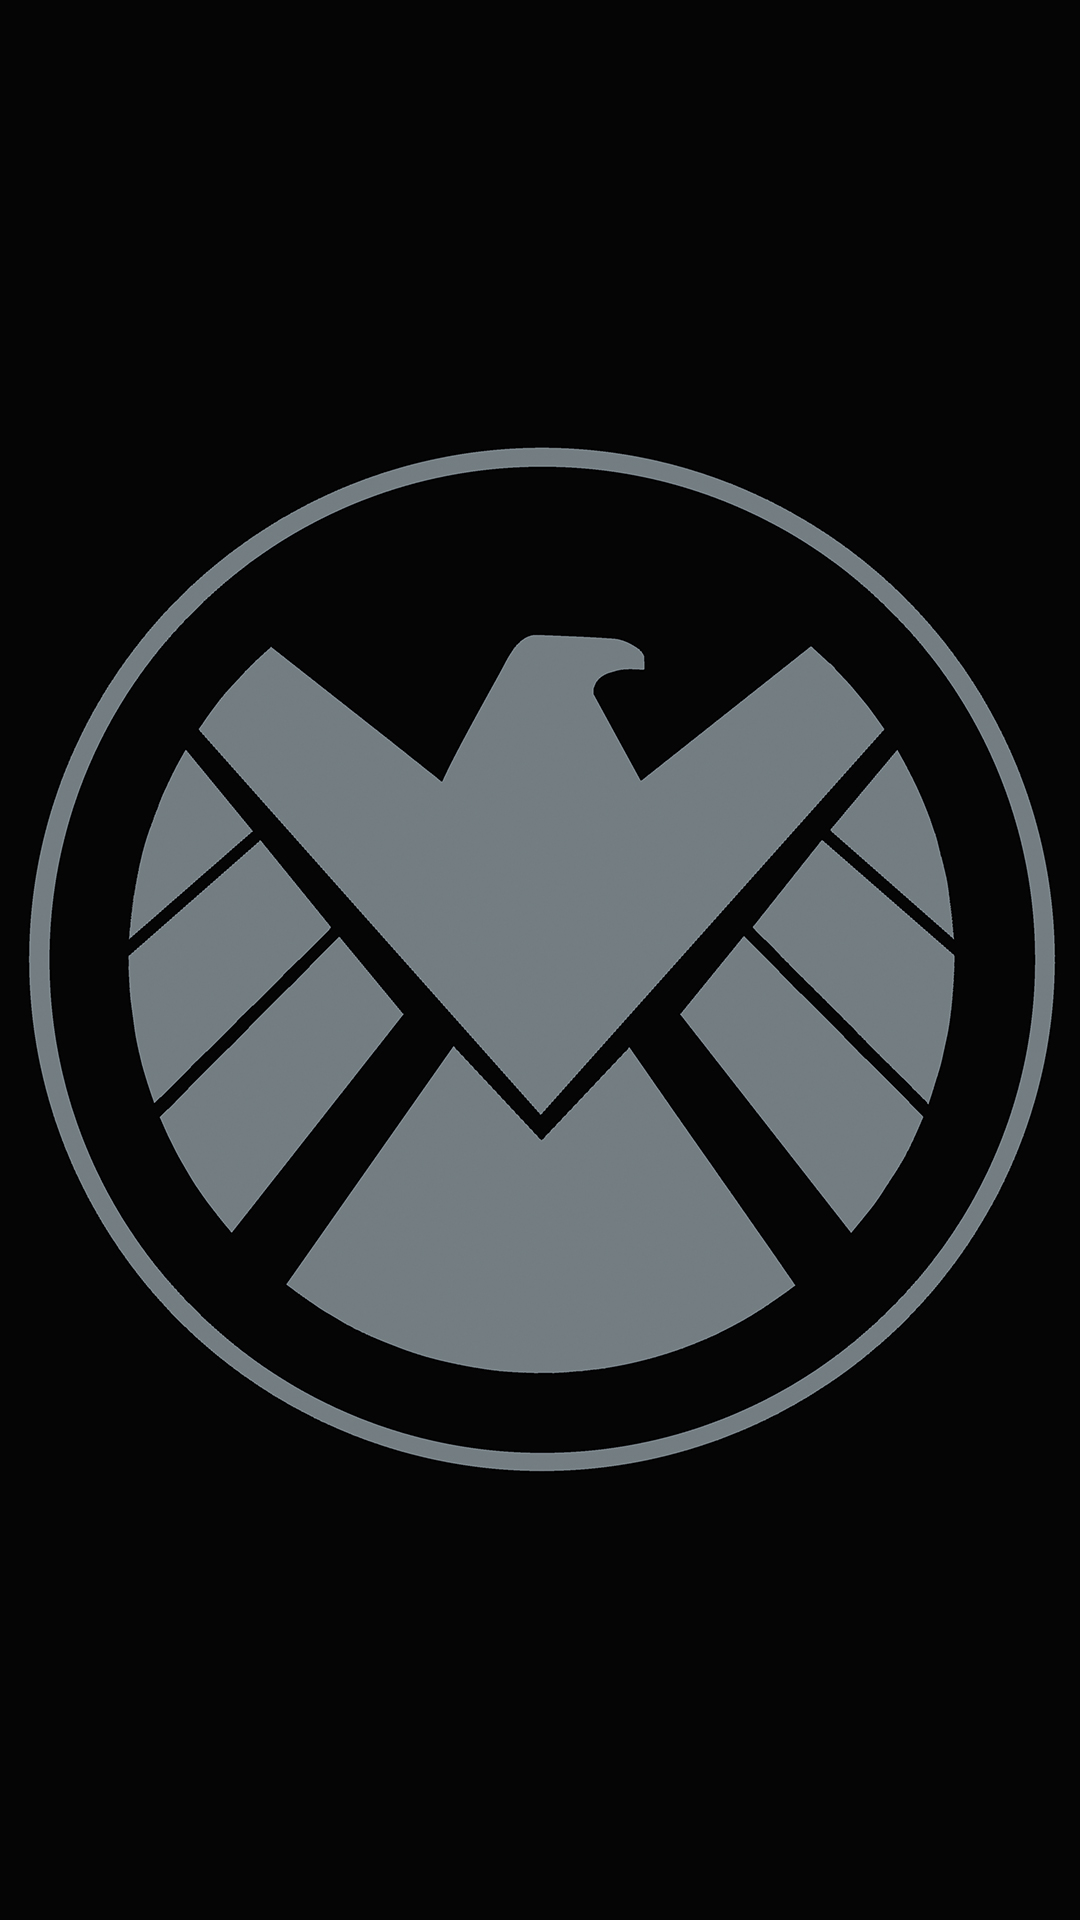 agents of shield free download